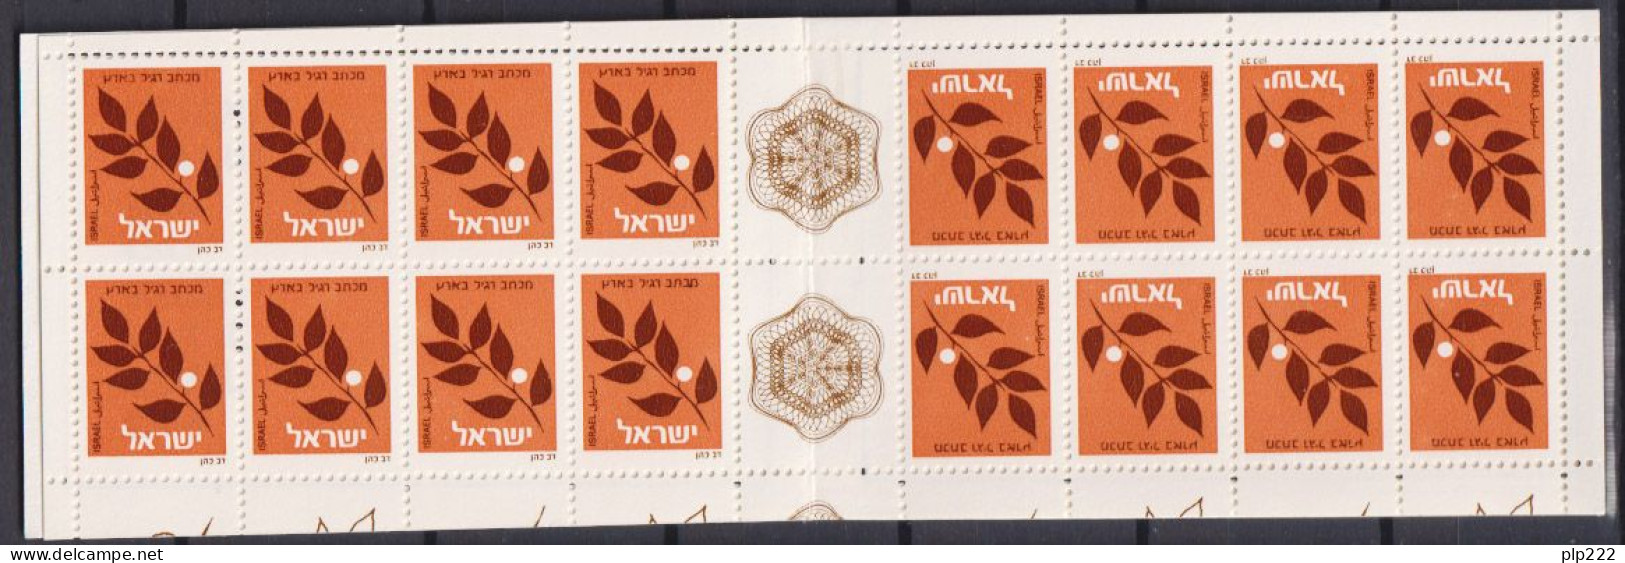 Israele 1982 Libretto / Booklet C836 **/MNH VF - Booklets